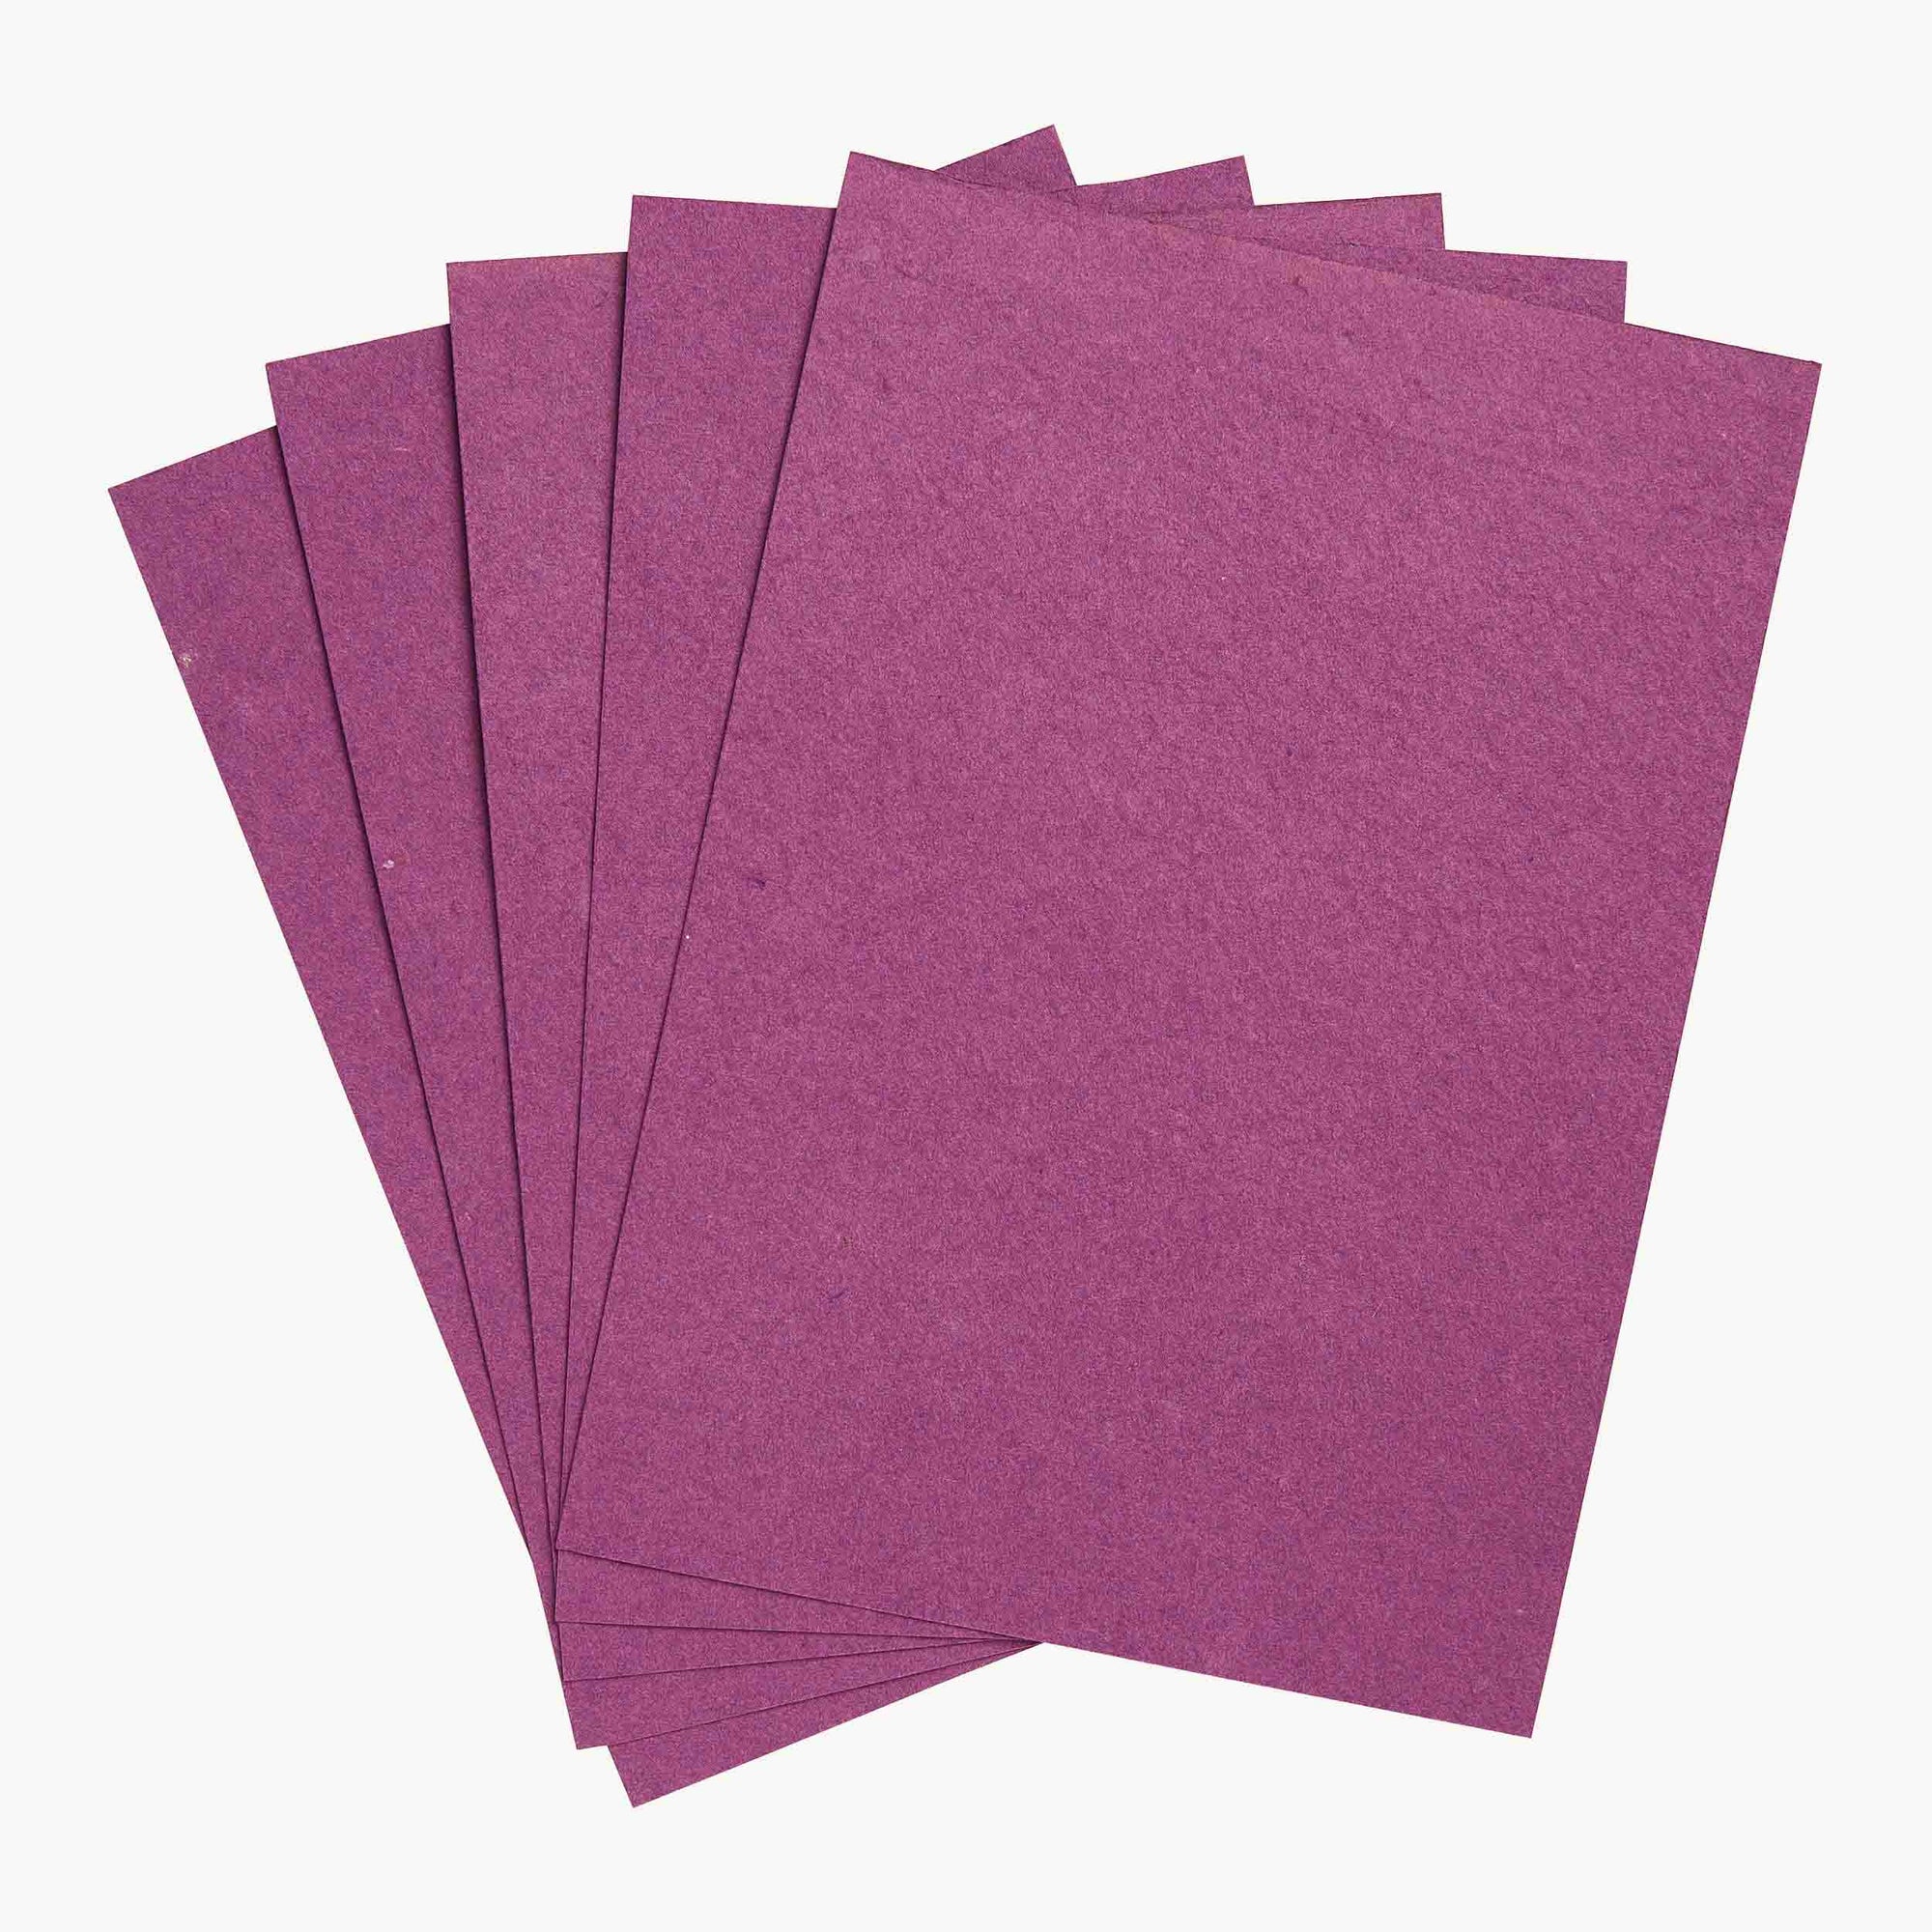 Purple coloured vegetable seed paper made using tomato and chilli seeds